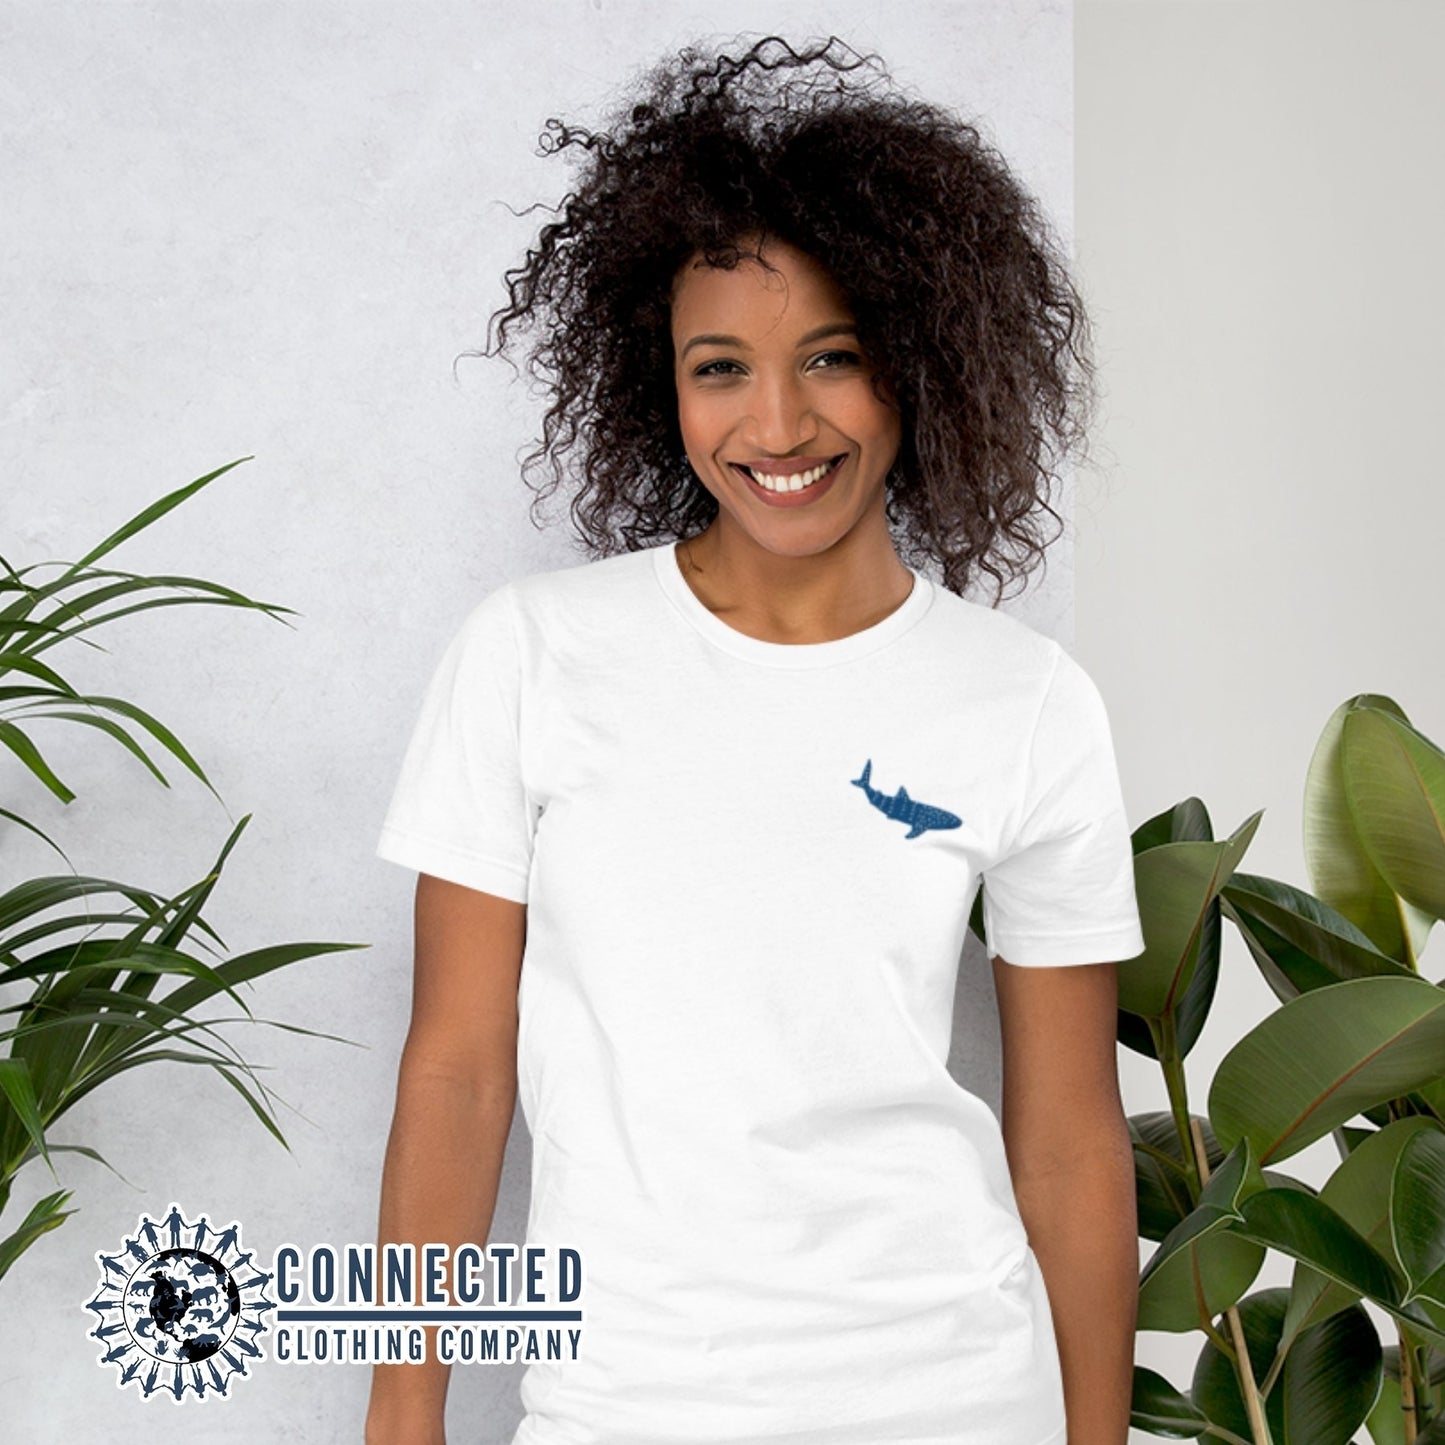 Model Wearing White Embroidered Whale Shark Short-Sleeve Shirt - sweetsherriloudesigns - Ethically and Sustainably Made - 10% of profits donated to shark conservation and ocean conservation